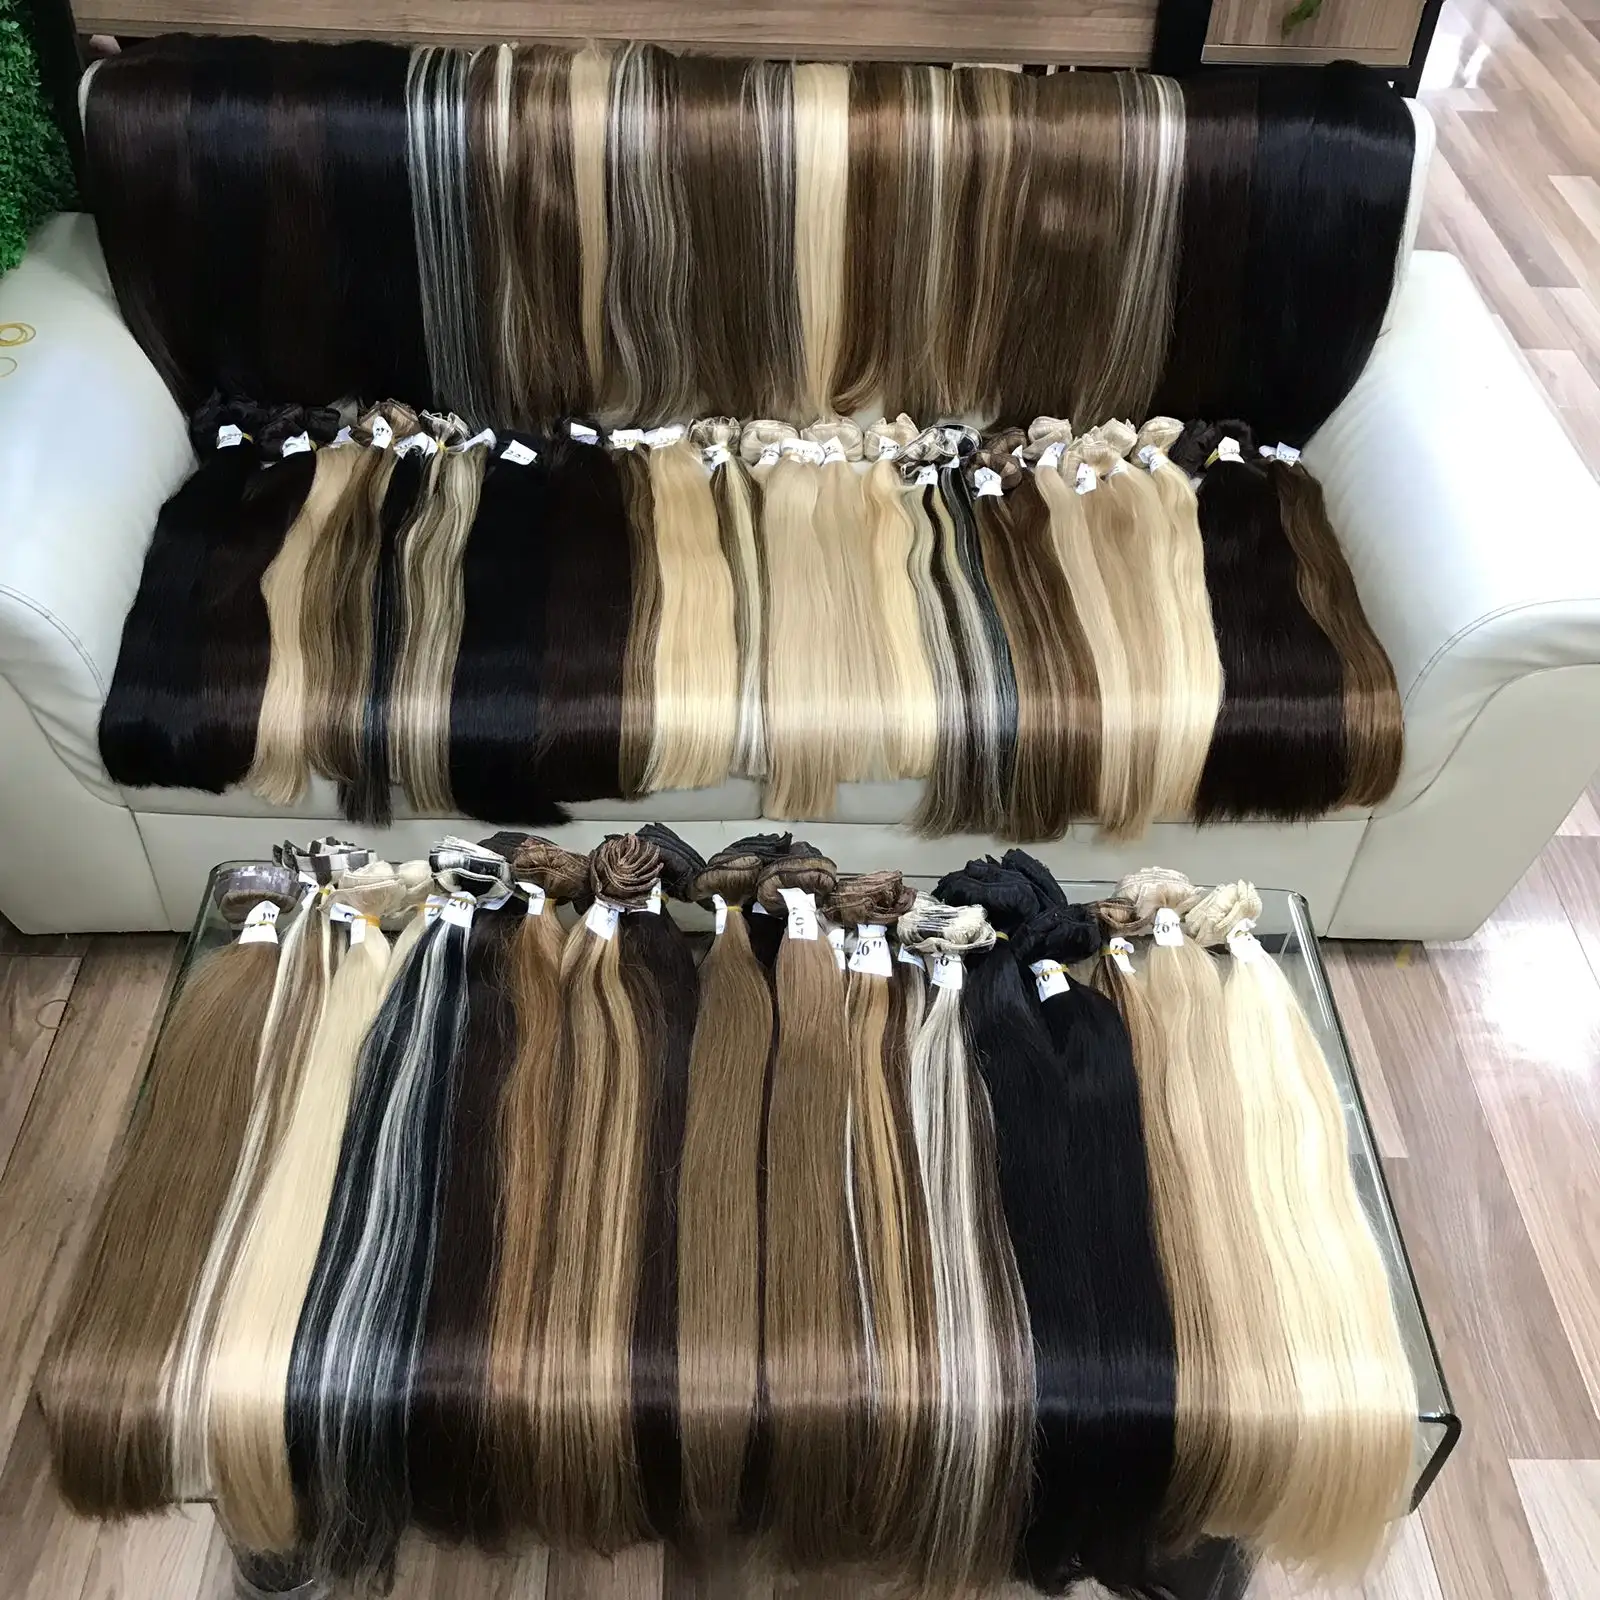 Wholesale big order Clips in hair 100% Vietnamese Human Hair Extension clip in hair bundles no synthetic